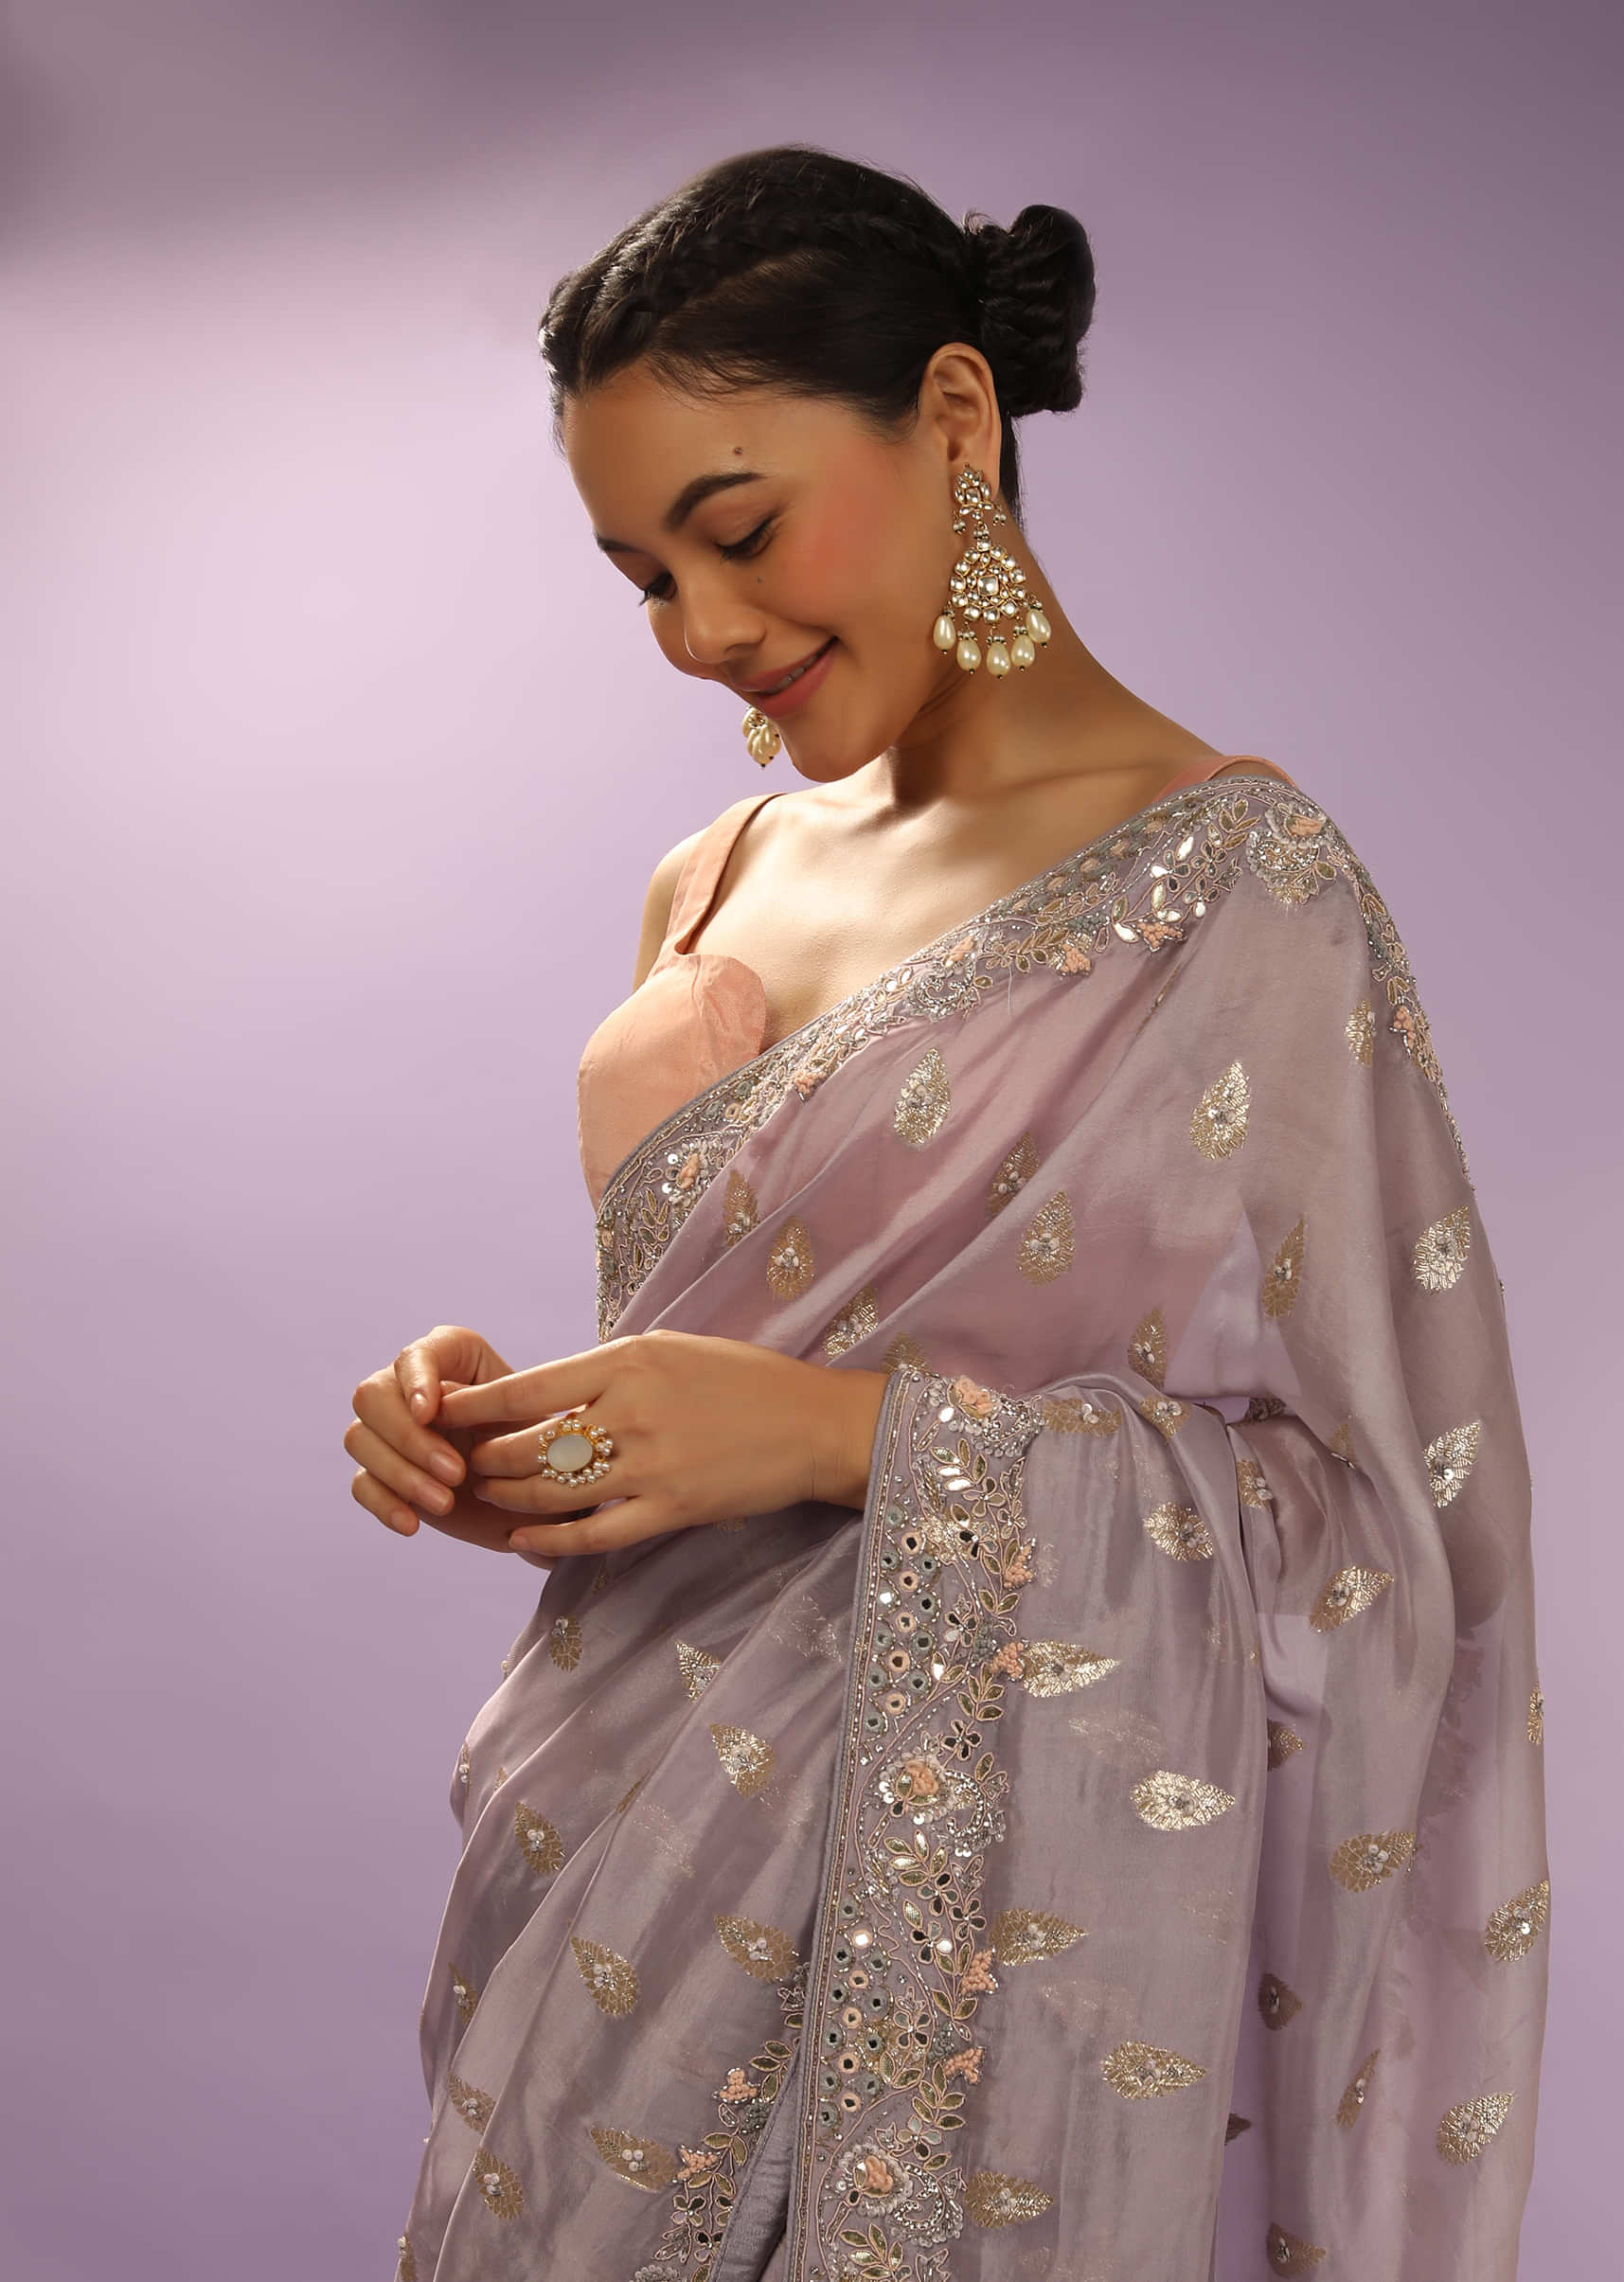 Dusty Lavender Saree In Organza Silk With Woven Buttis And Colorful Mirror Abla Embroidery On The Border 